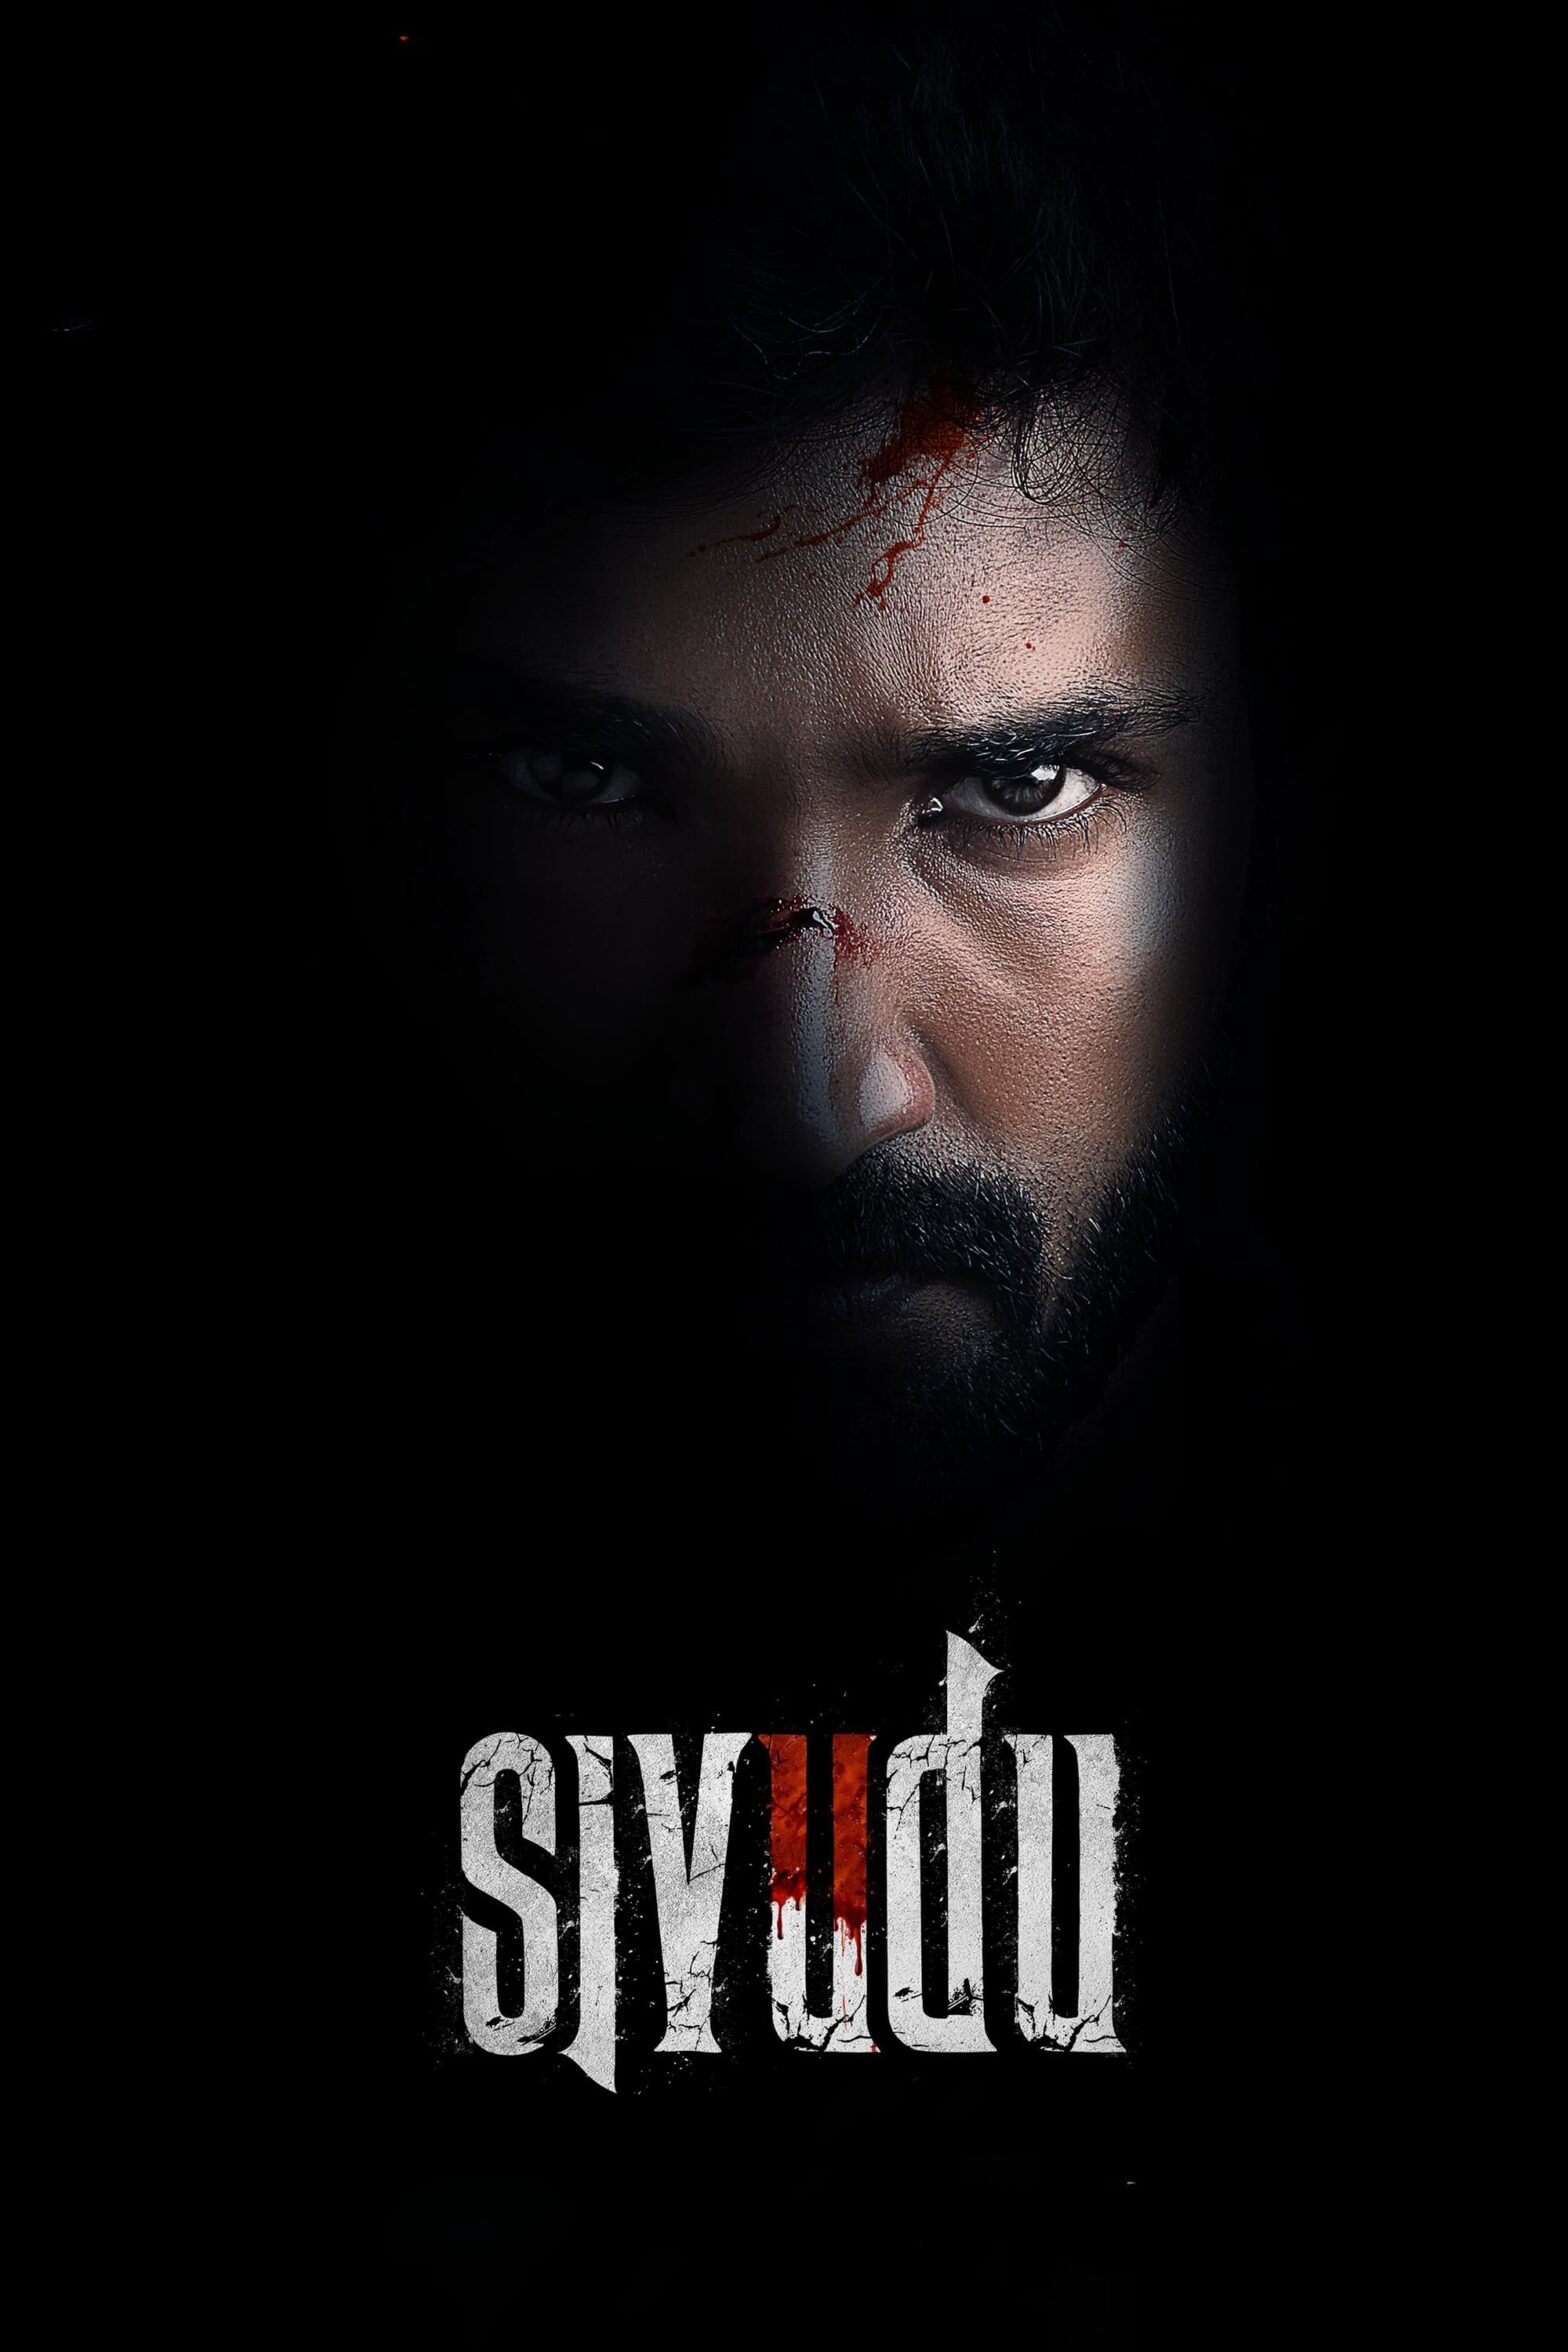 Poster for the movie "Sivudu"